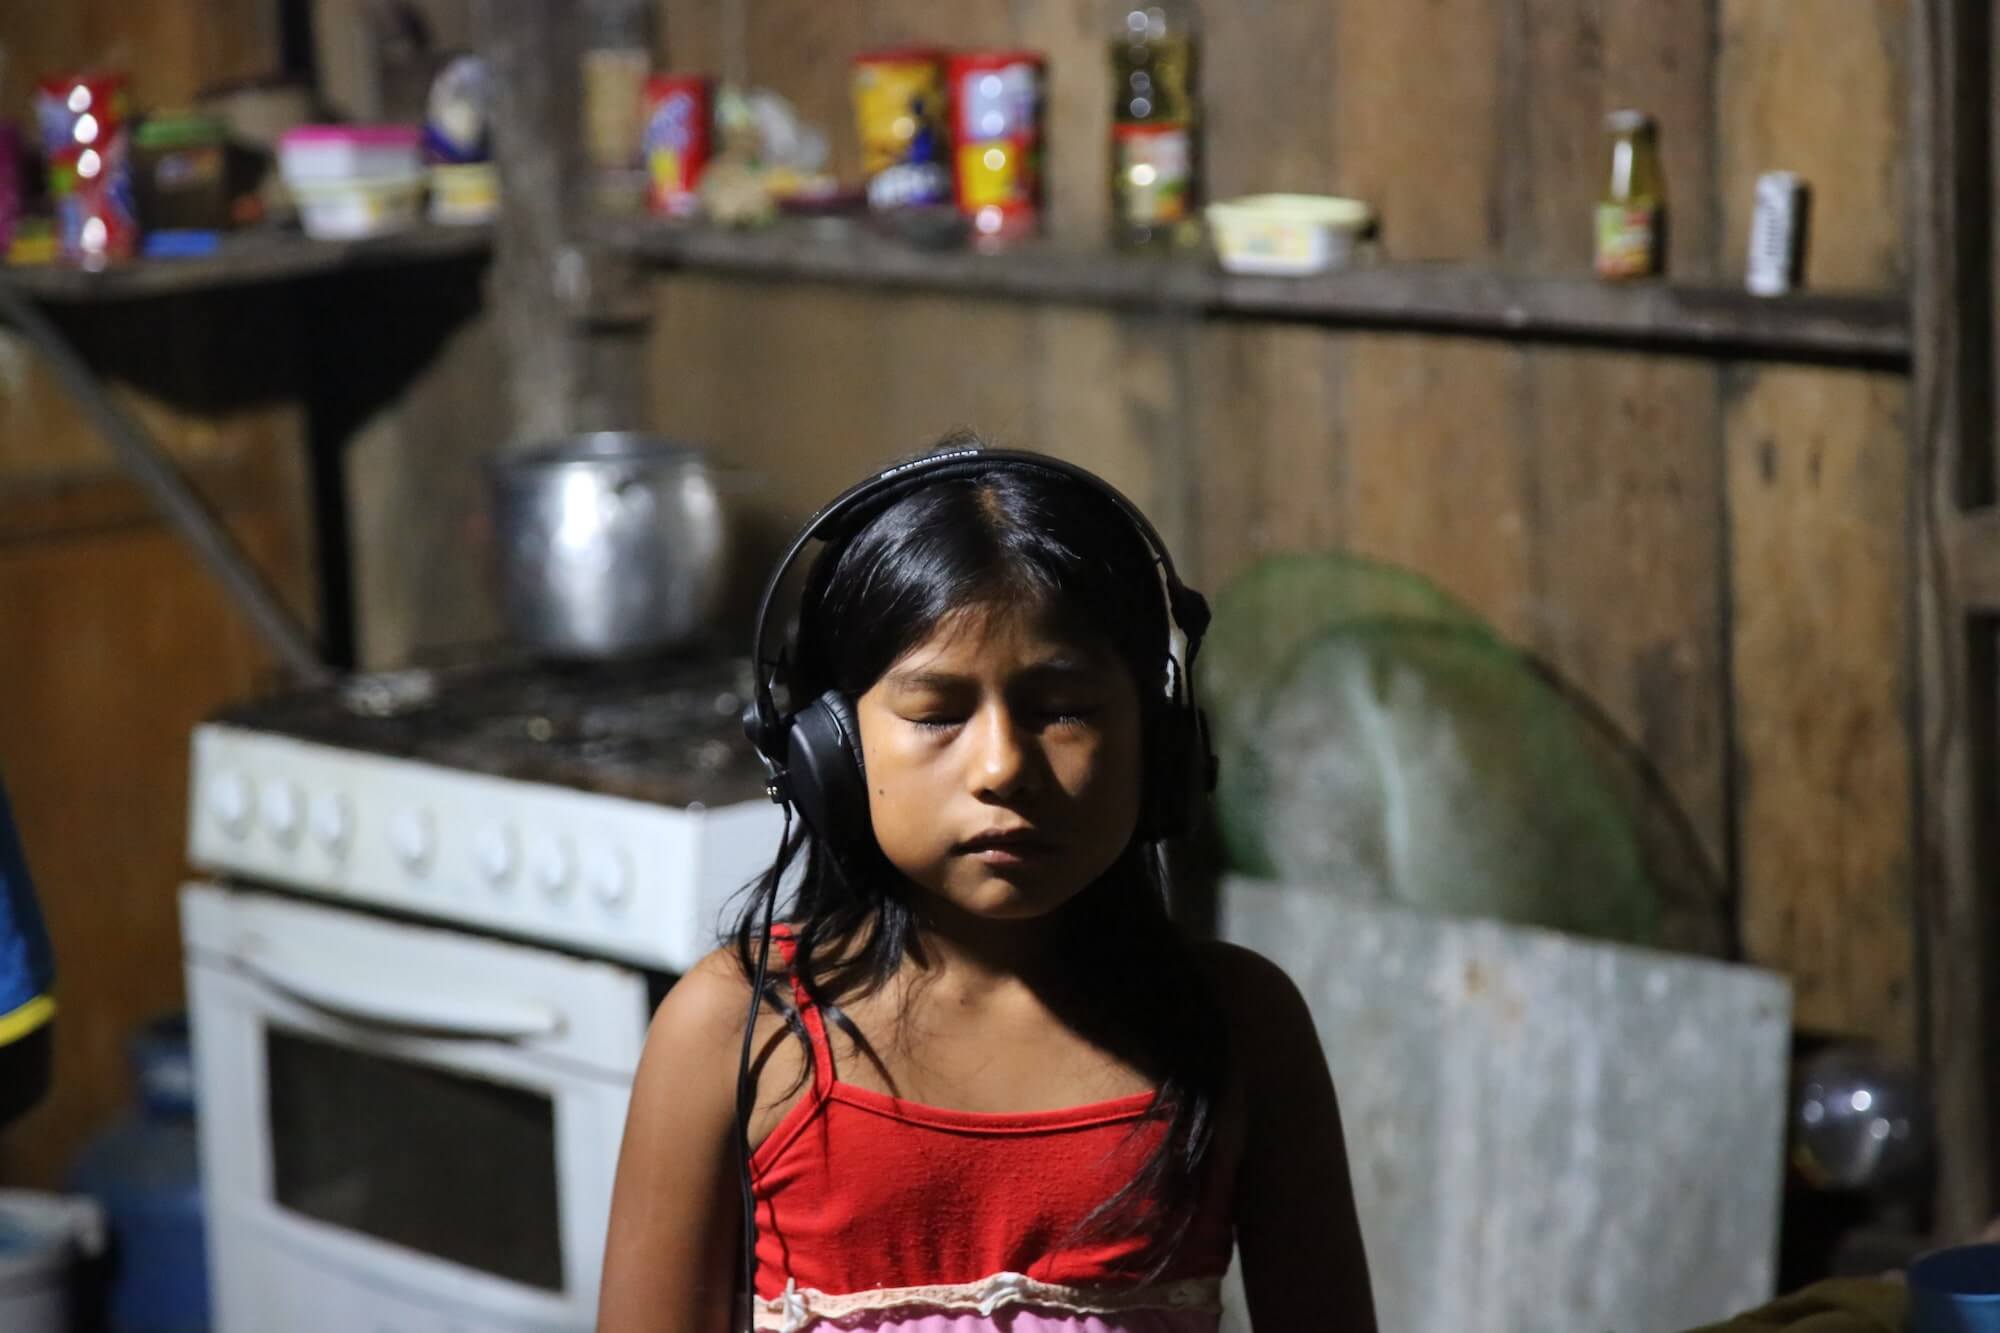 A child in a kitchen closes their eyes and listens to audio through a set of headphones